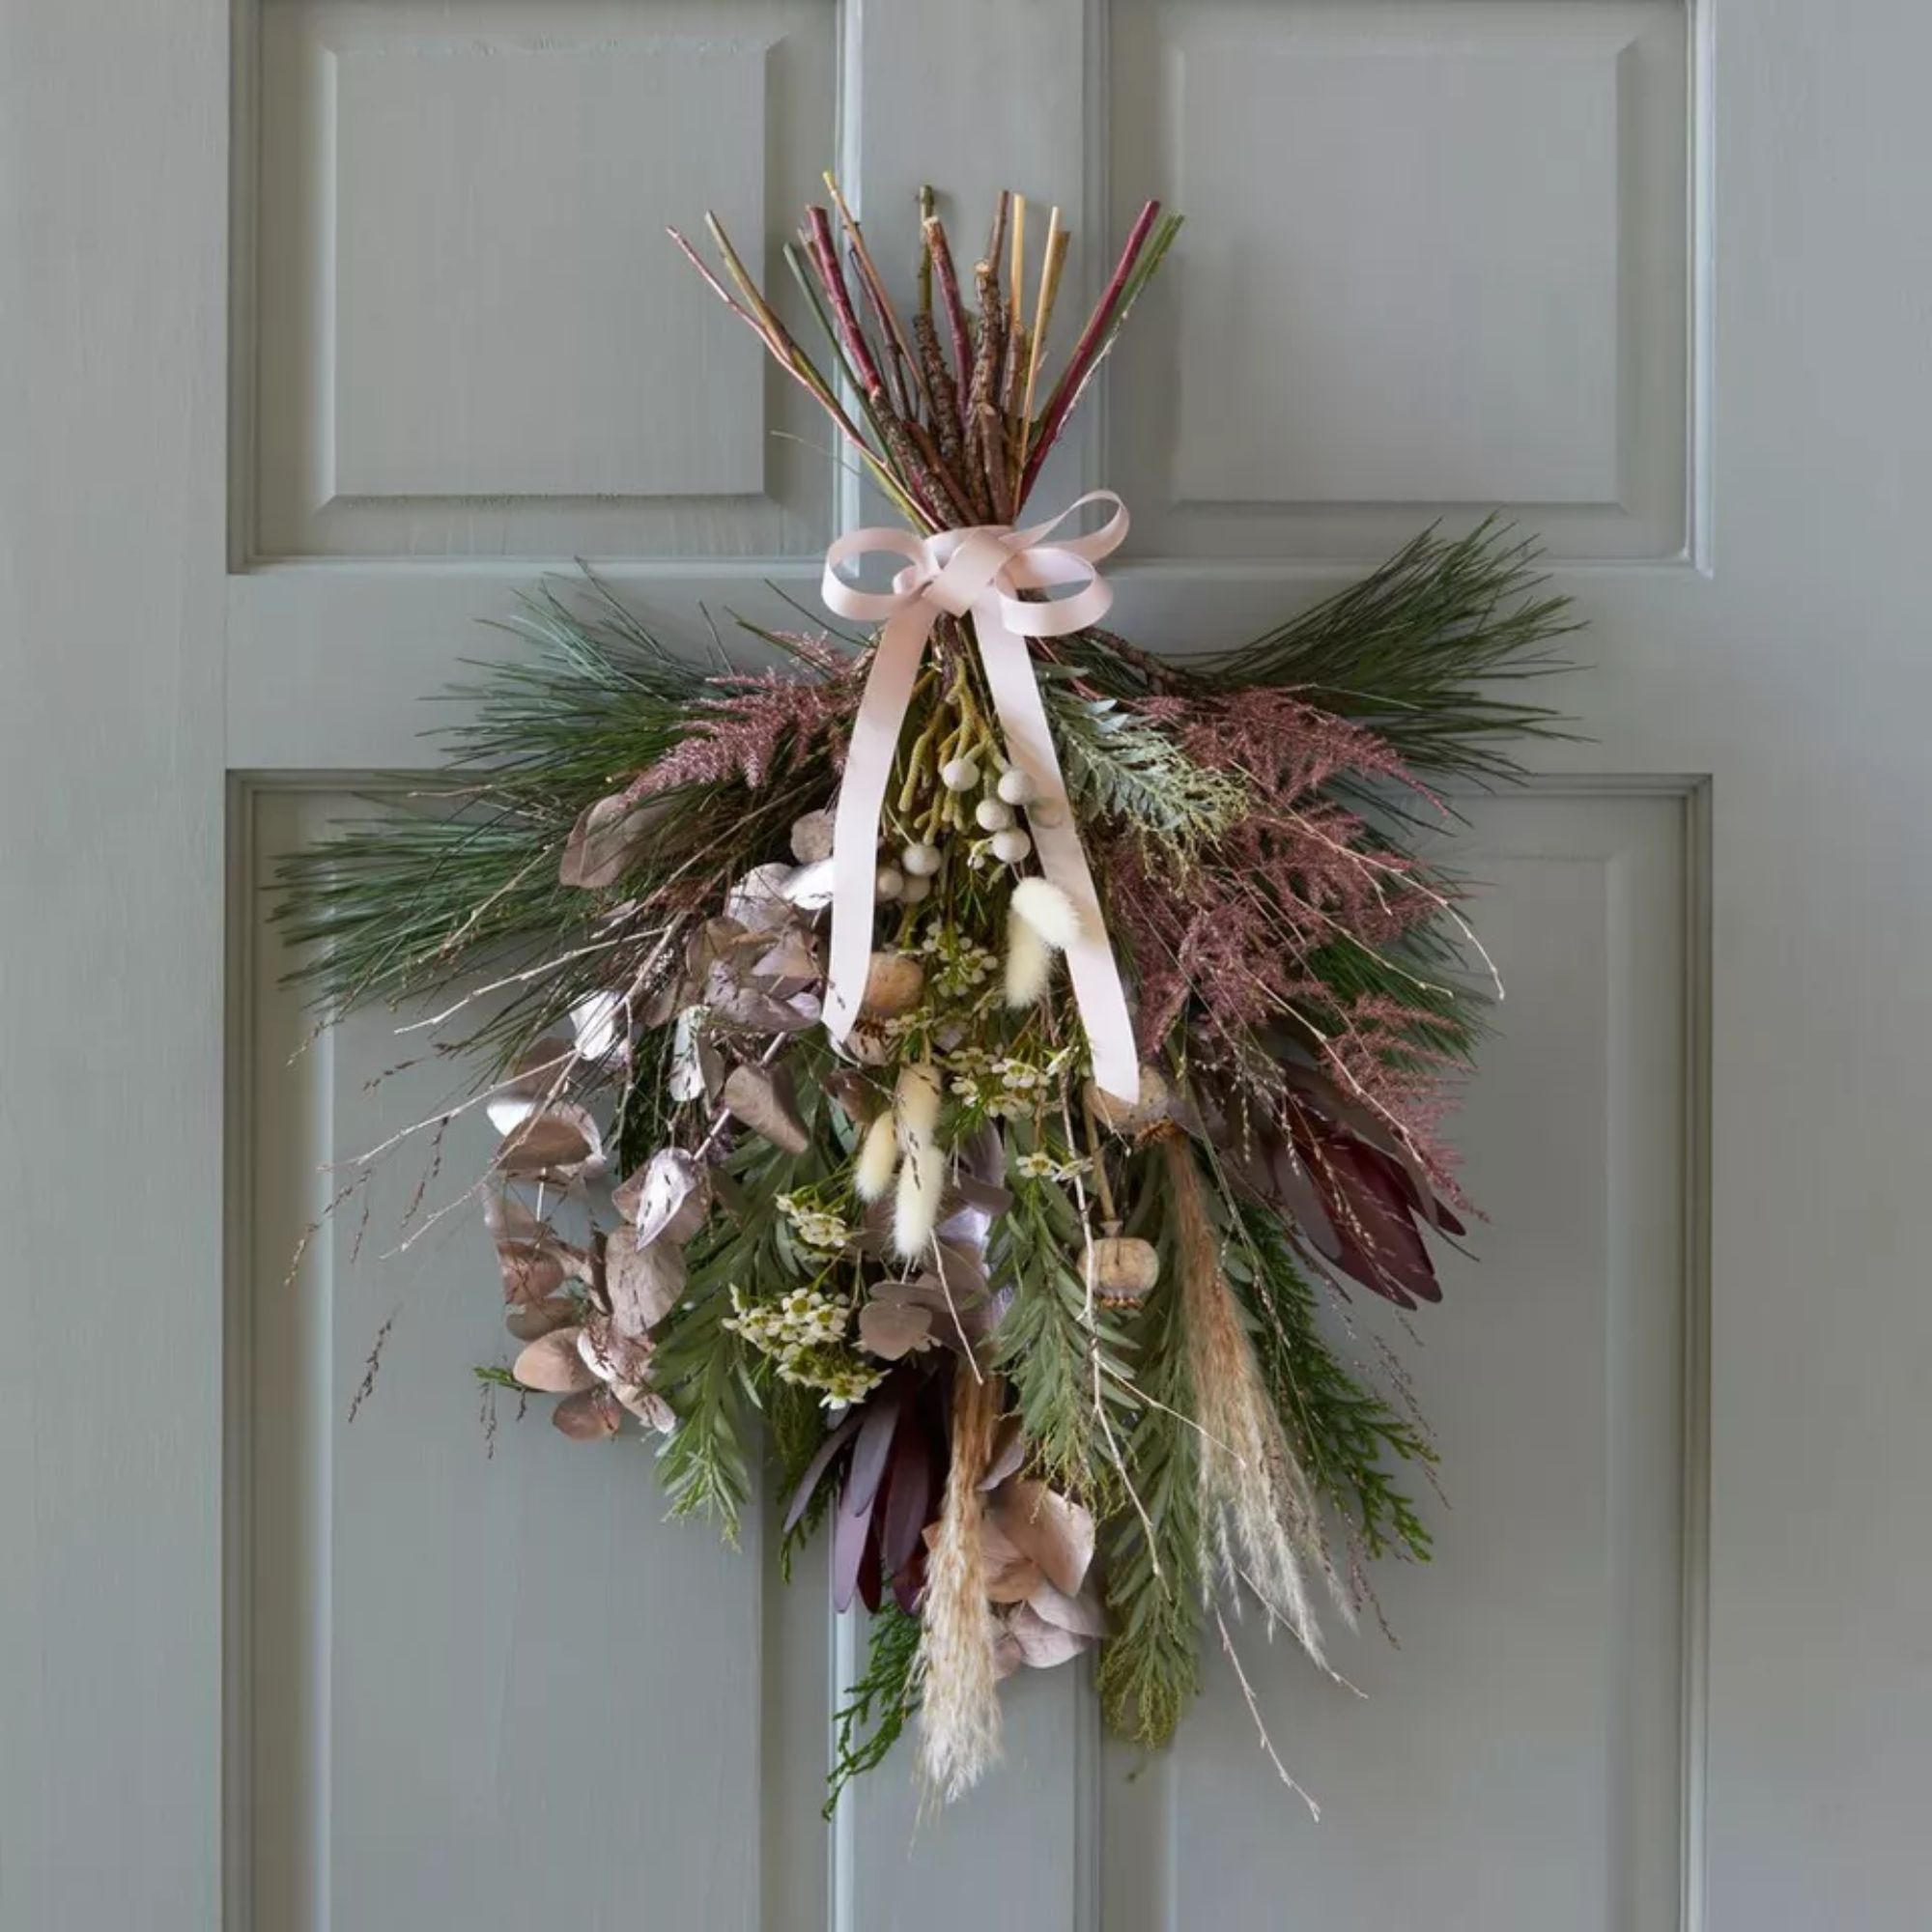 A Christmas wreath in the style of a swag